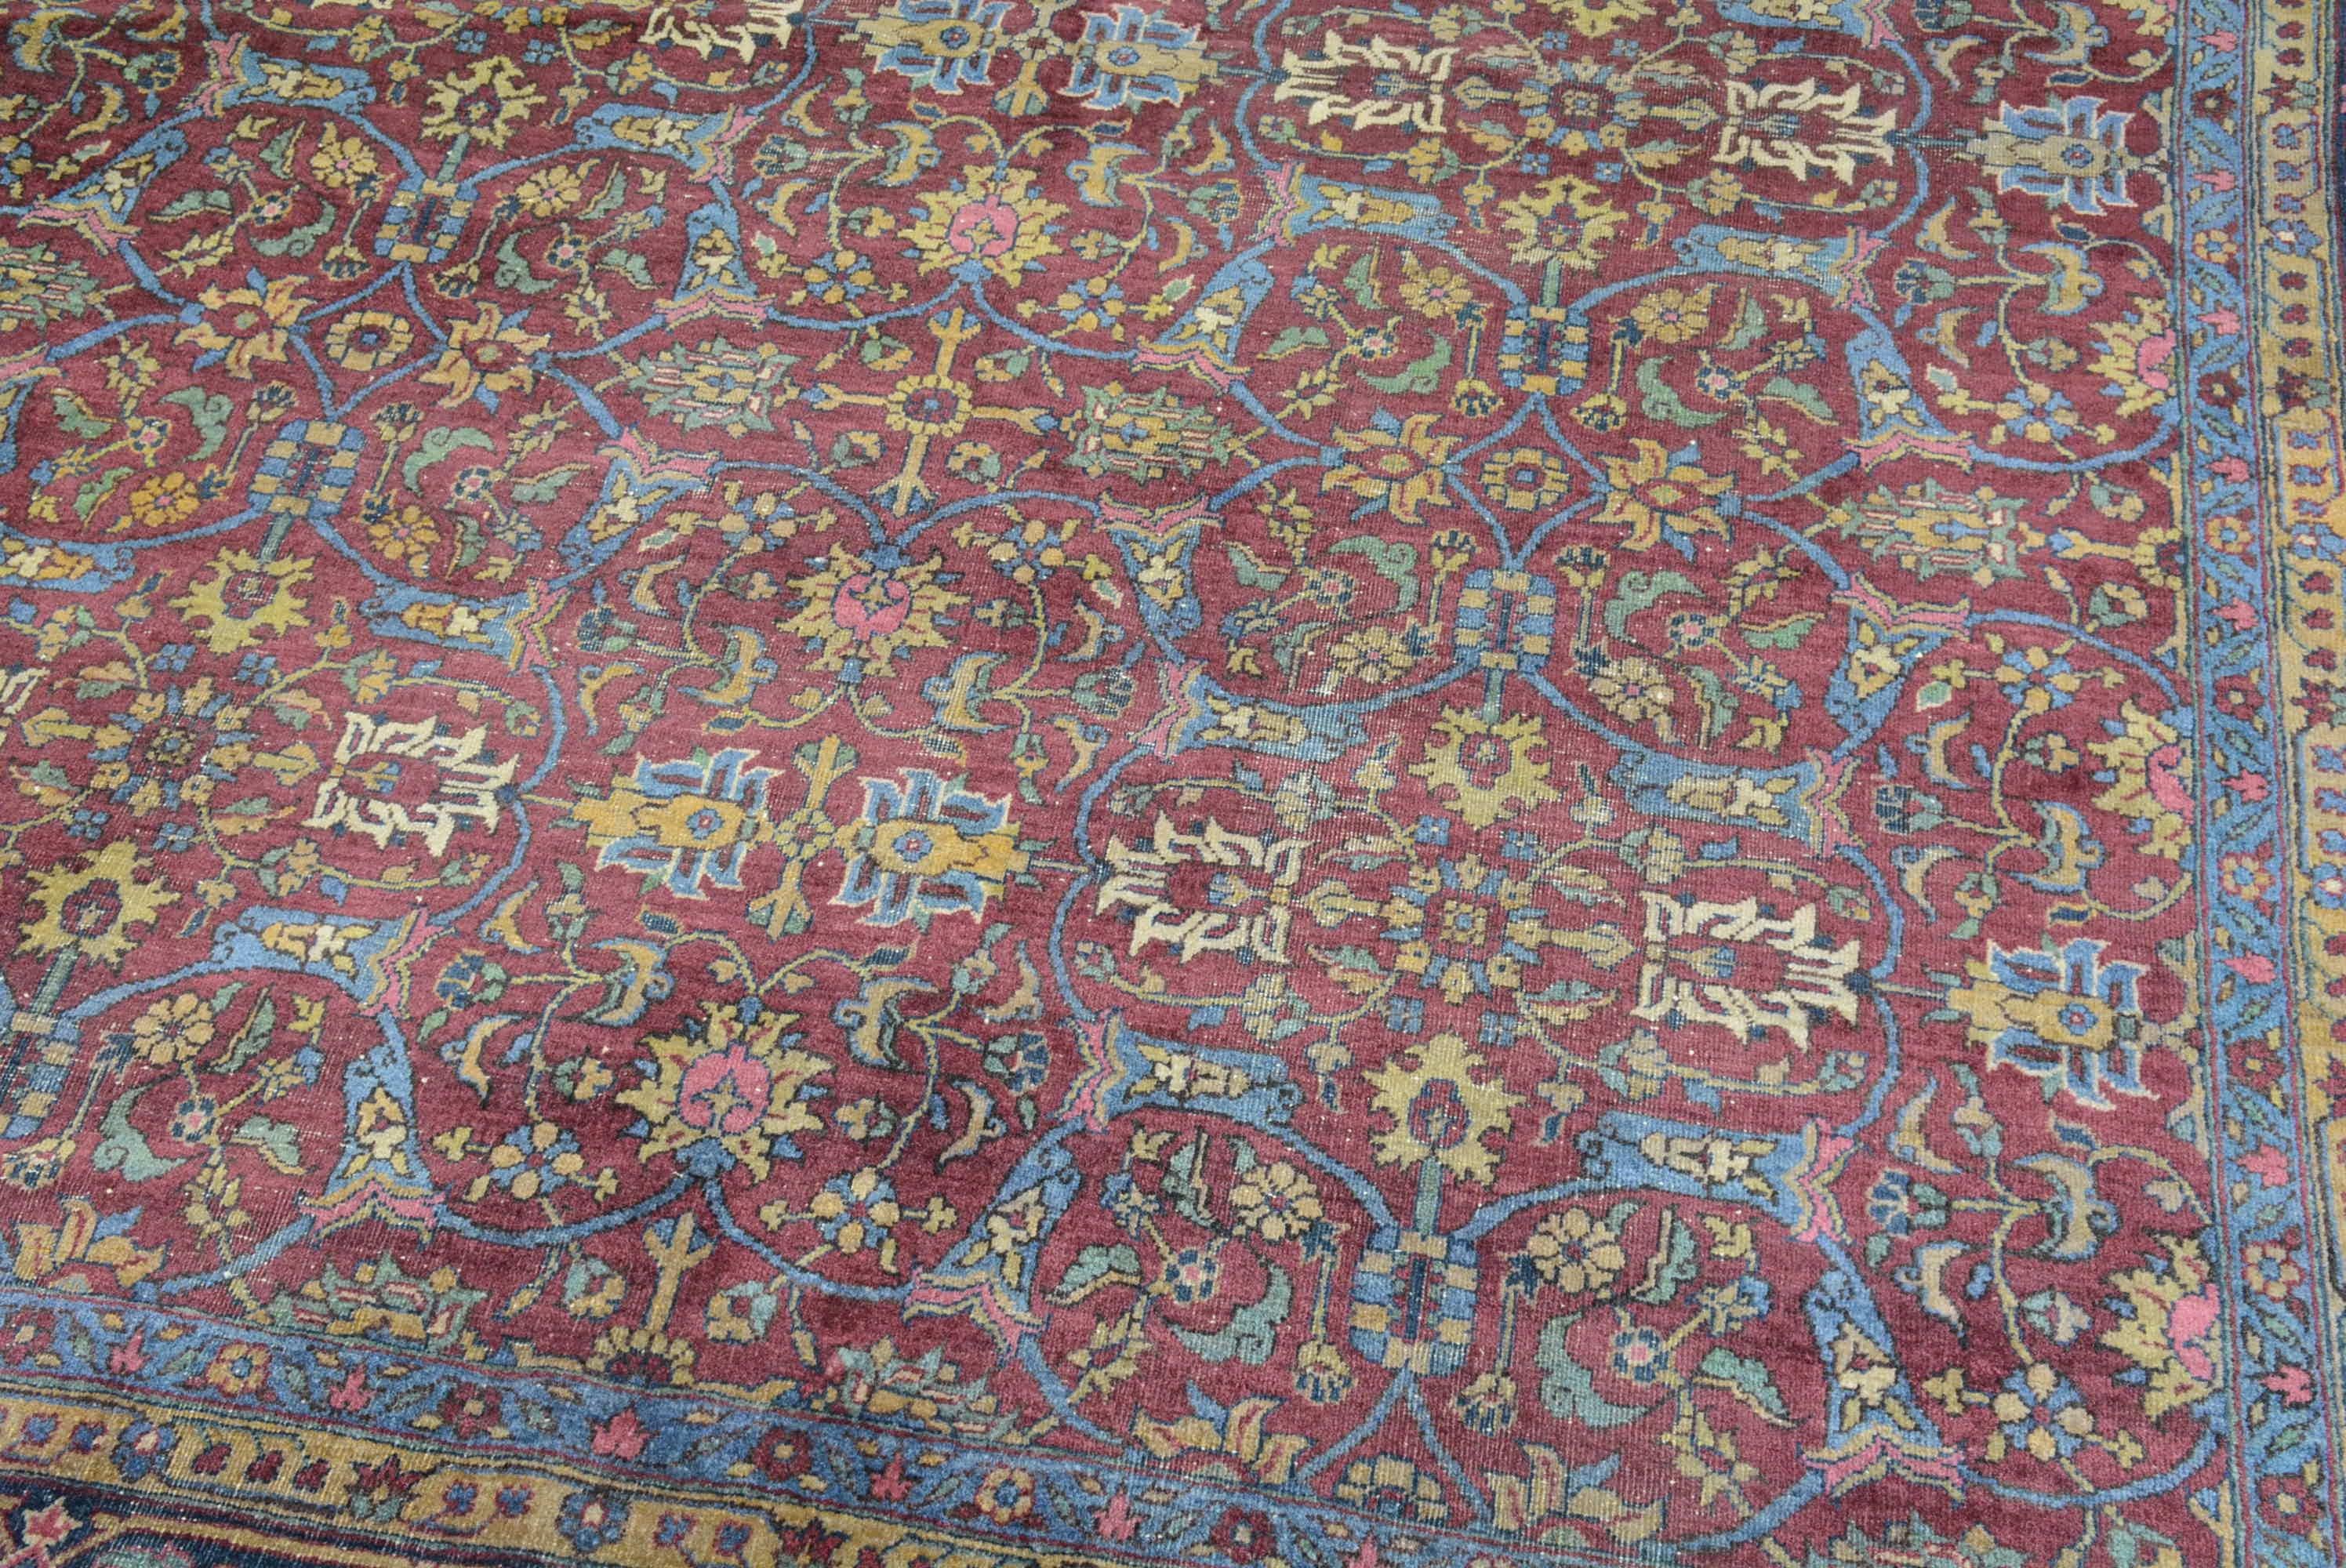 A vintage Turkish Sivas carpet with an overall floral pattern inspired by those woven in Tabriz Persia. Measures: 9' 10